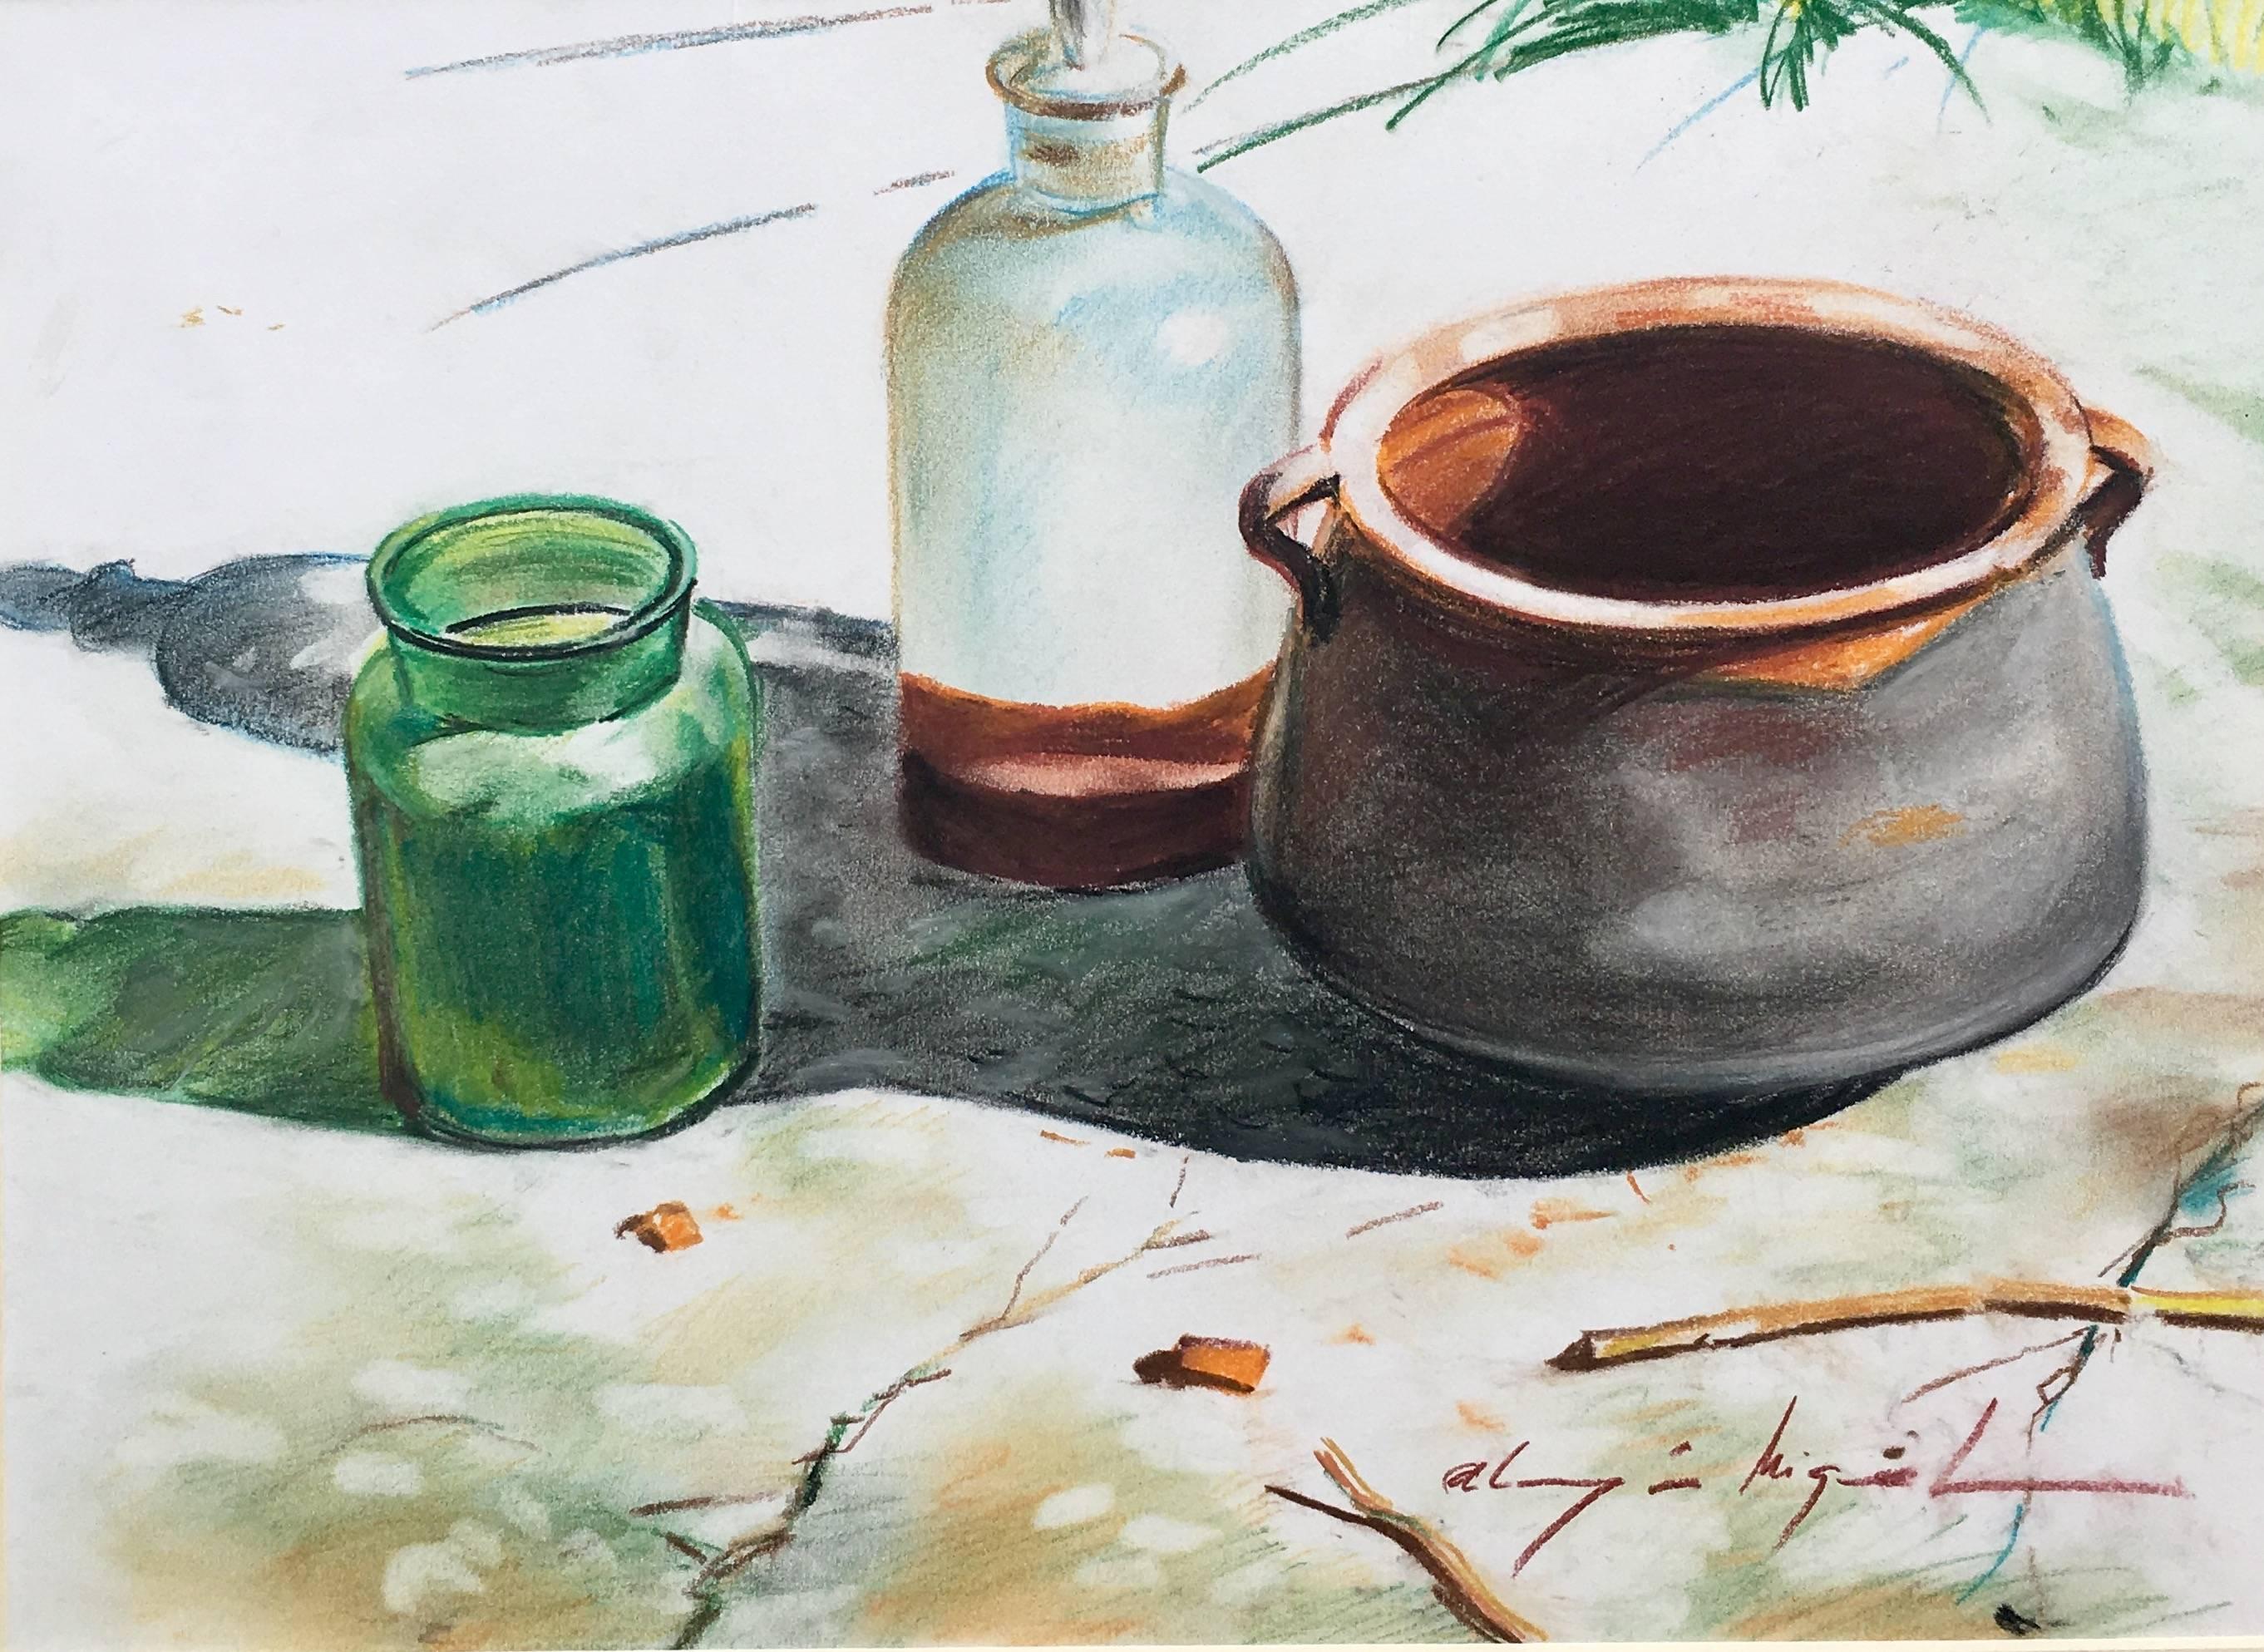 Almazan Realistic Still Life watercolor Painting. . frame
 MIQUEL was an artist focused on the art of realism. His structured works on his great mastery of drawing, are romantic and translates us to past times ...
Beautiful works on paper.
